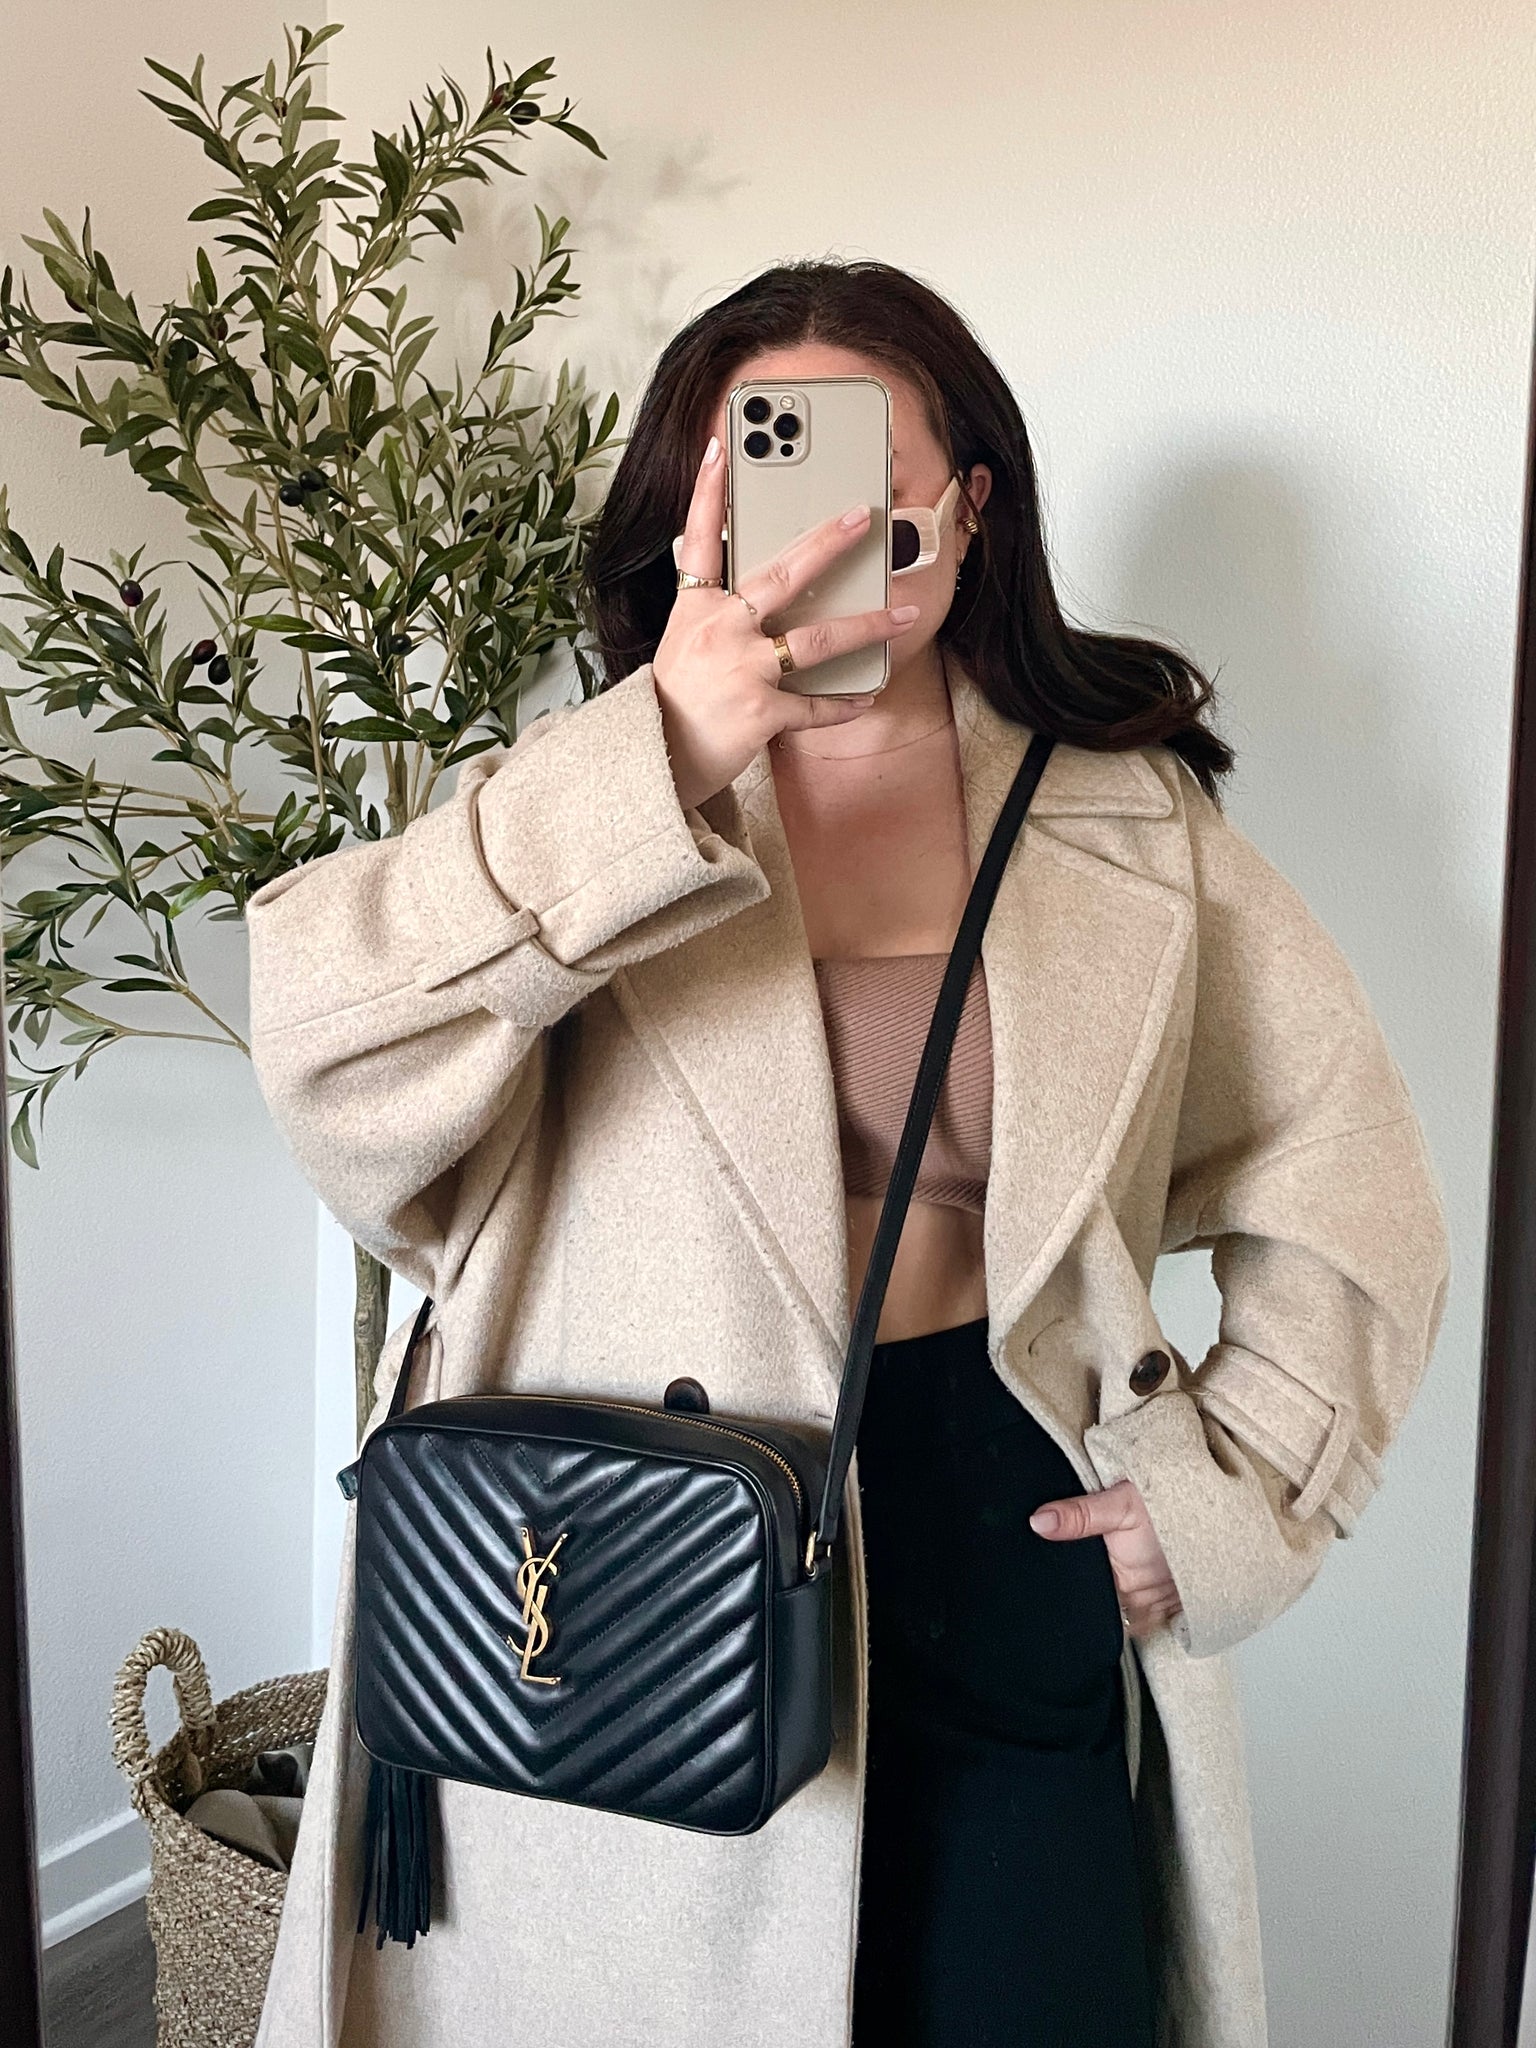 Lou camera bag quilted leather yves saint laurent Julia Paredes on the  account Instagram of @julia_paredes_off